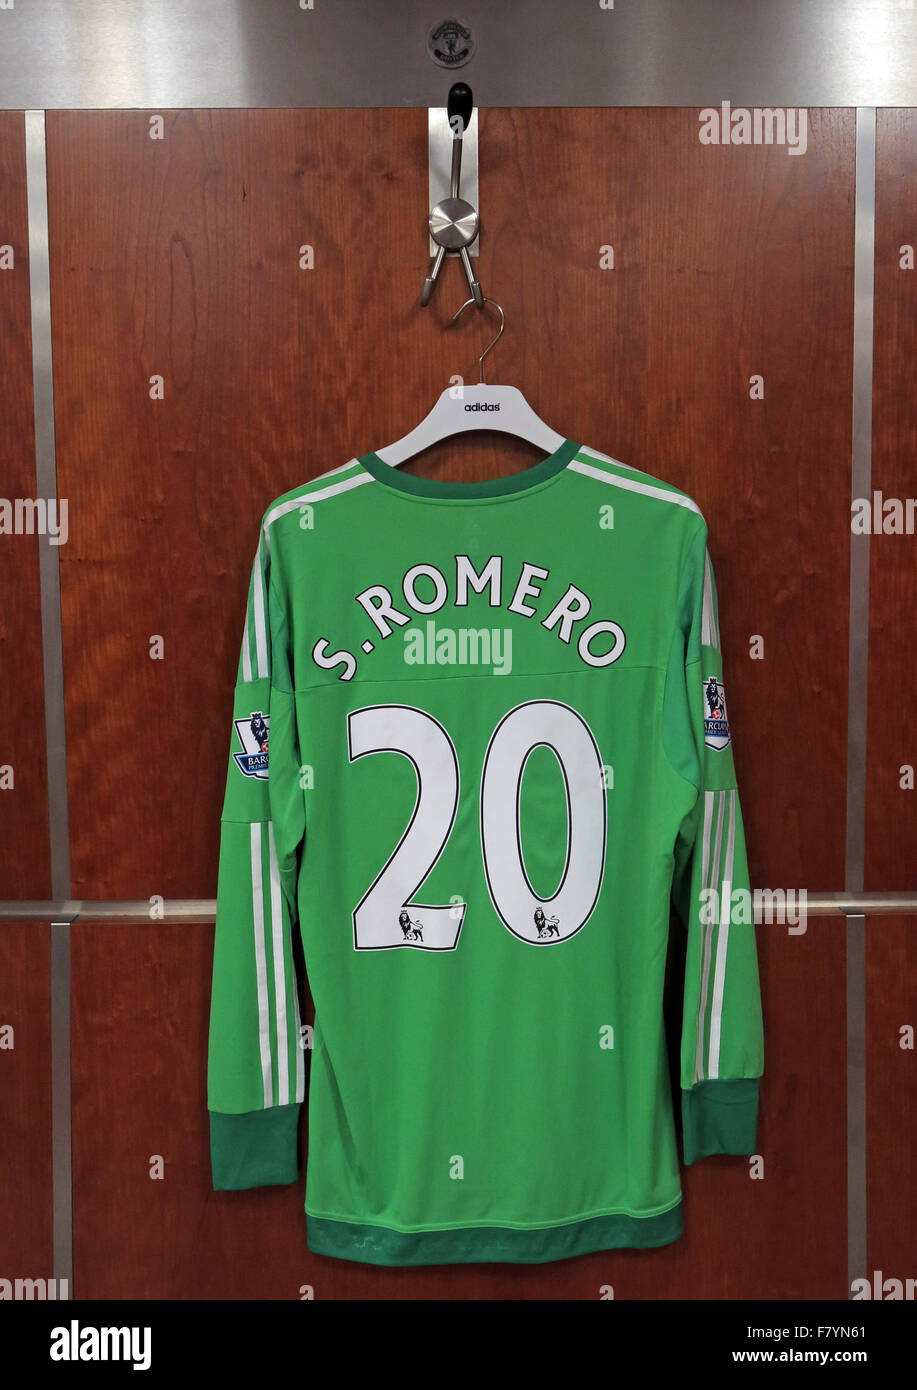 Sergio Romero chemise verte à MUFC dressing, Old Trafford Banque D'Images